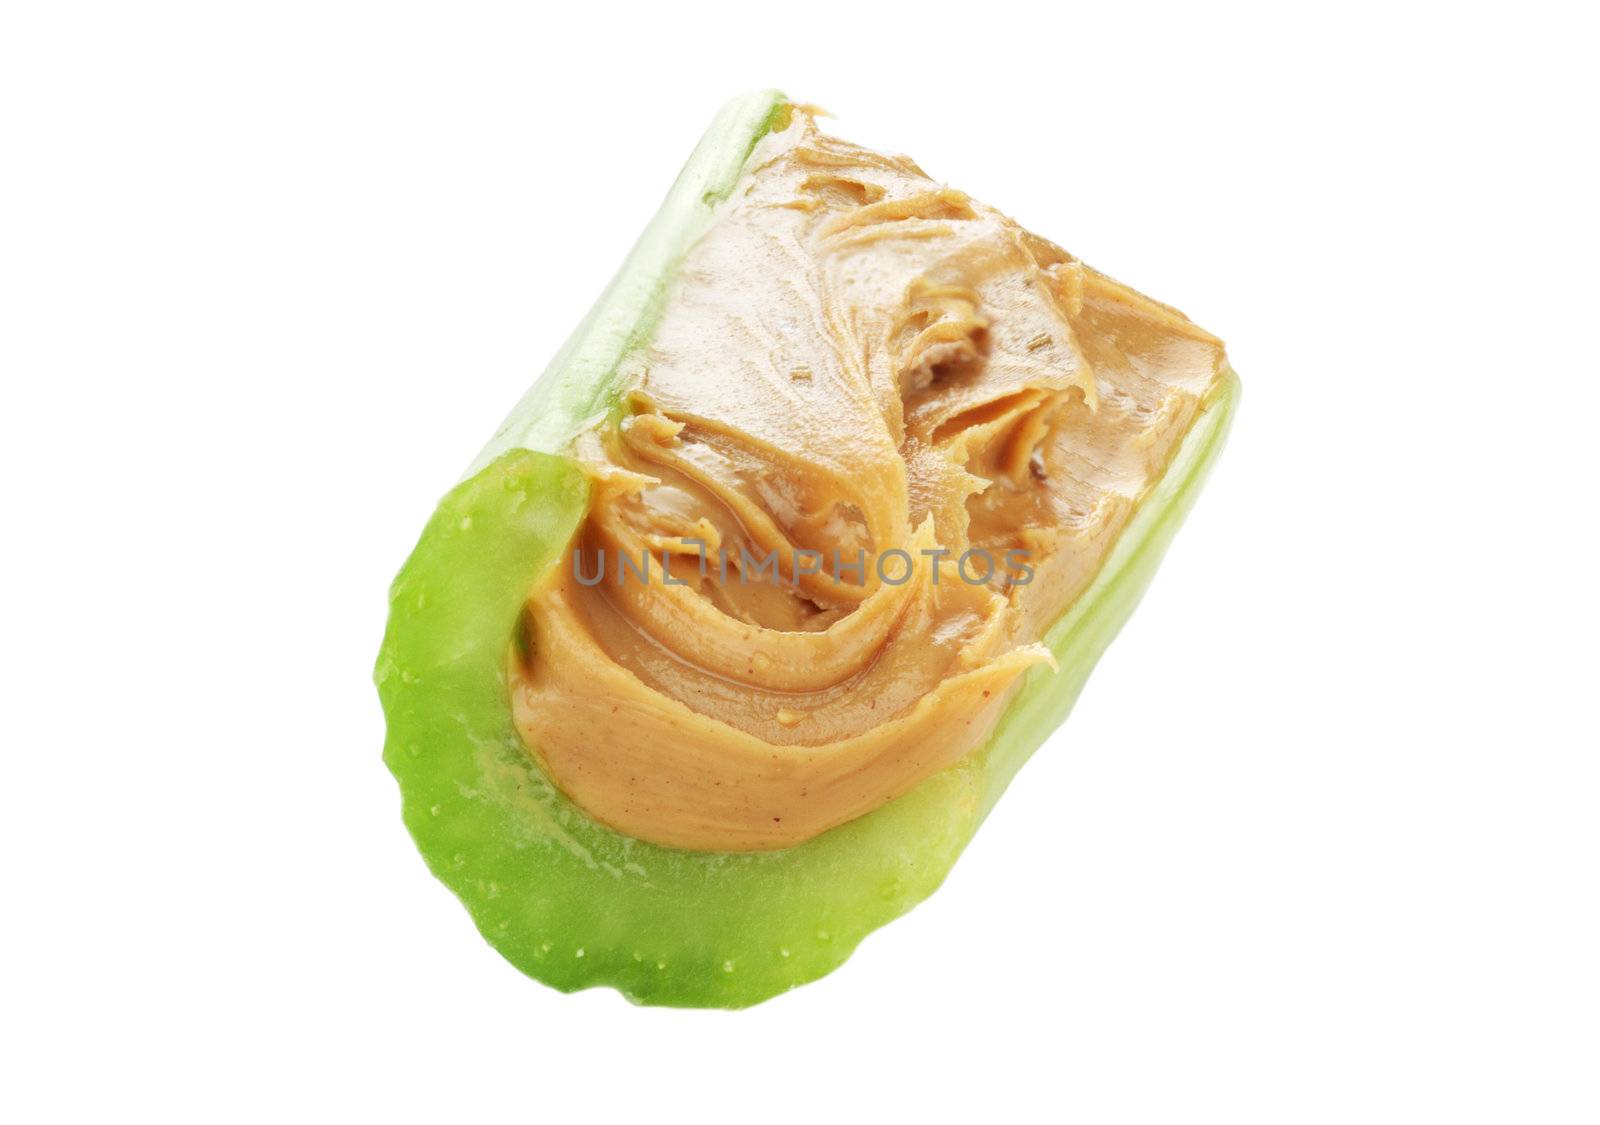 Celery and peanut butter isolated on white background. Clipping path included.